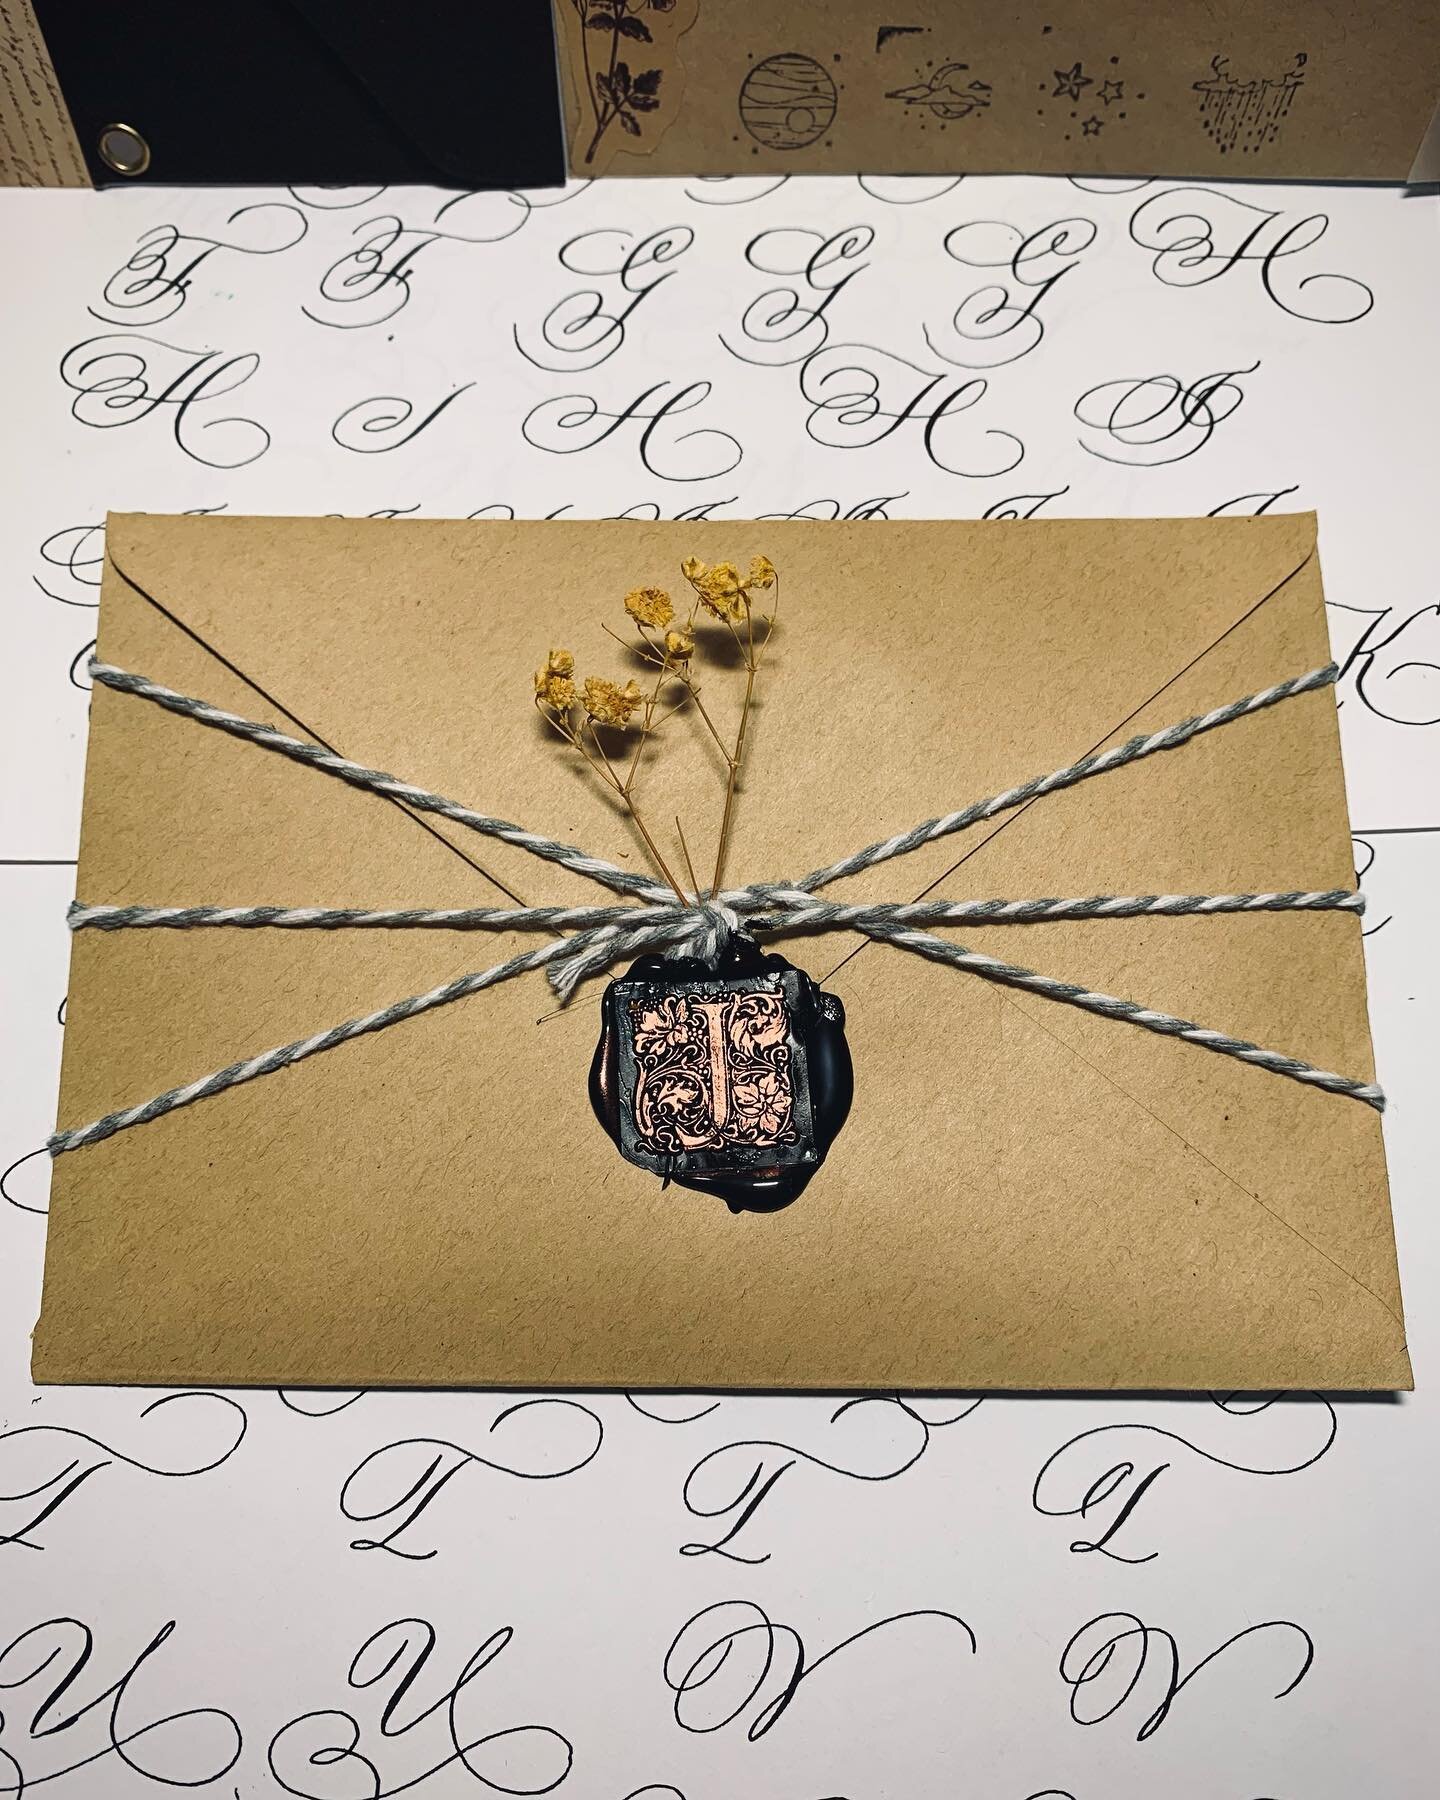 Swipe left to see how this envelope was made. Love putting thought into these little packages. Each one reflects the personality of the receiver - their quirks, vibes, psychology, communication styles etc. It&rsquo;s fun to think about people.